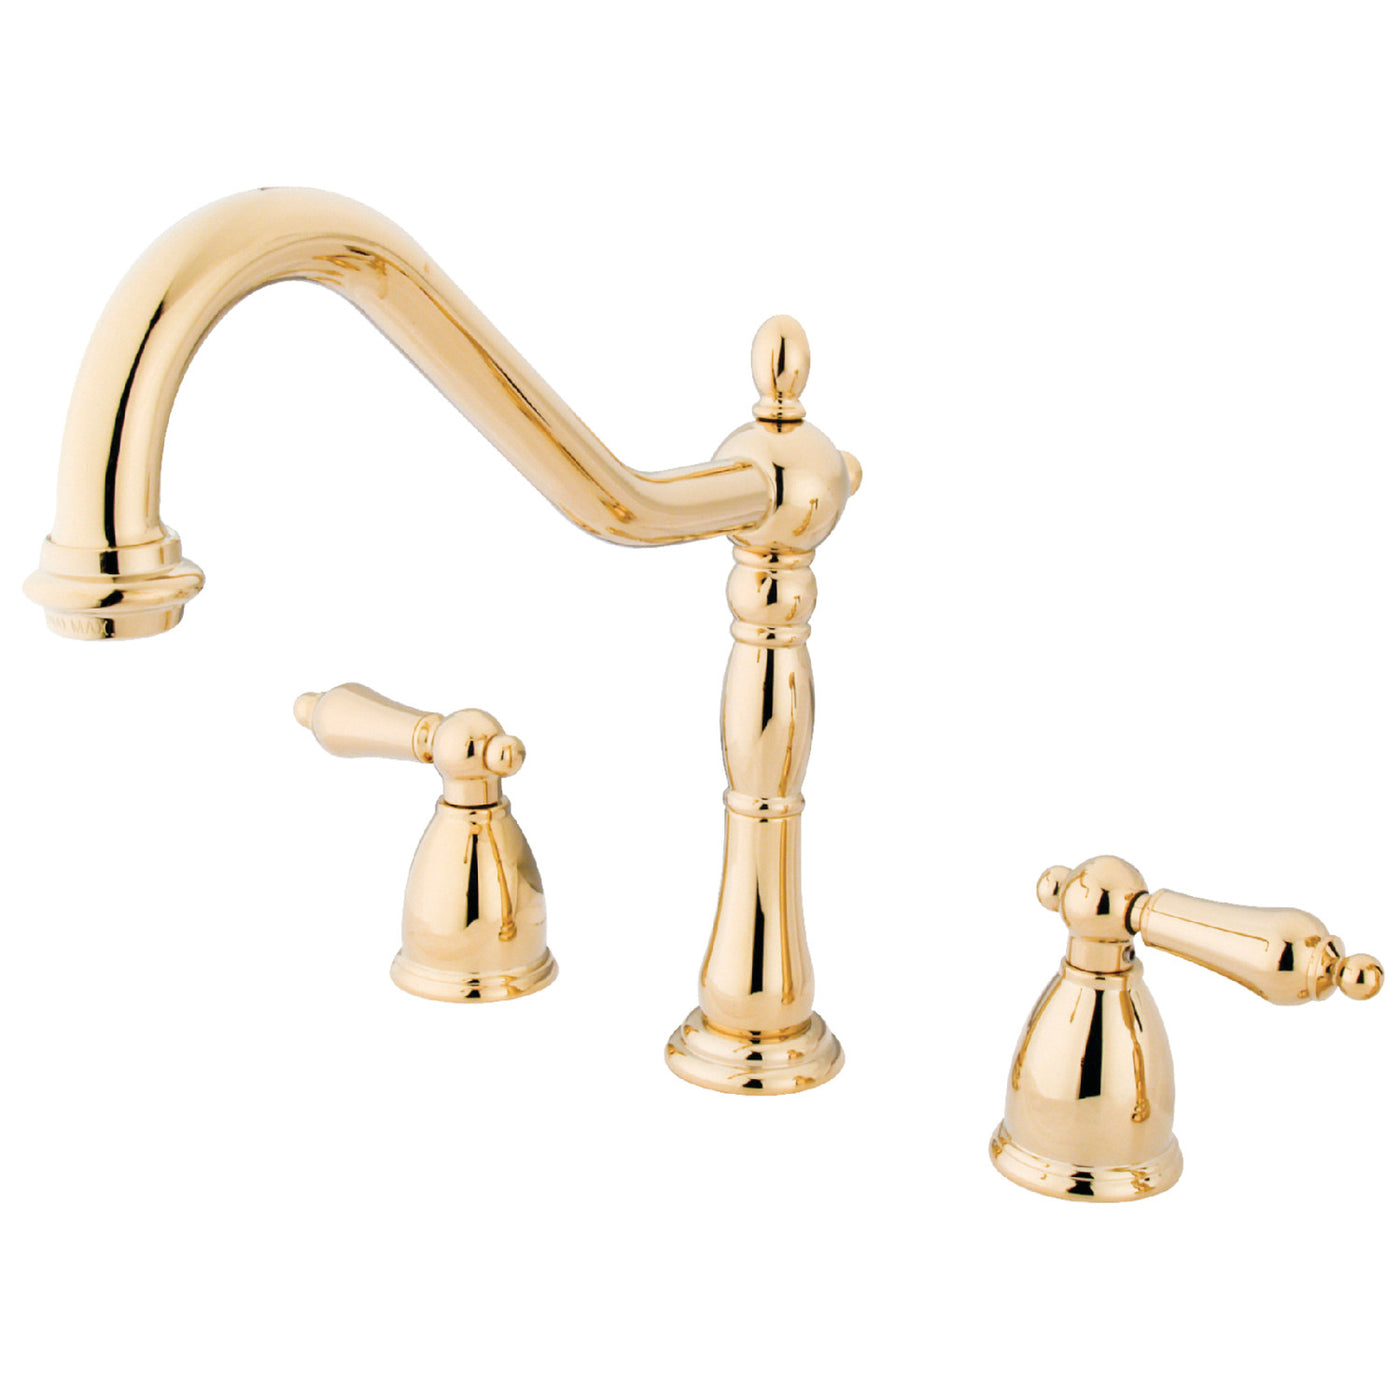 Elements of Design EB1792ALLS Widespread Kitchen Faucet, Polished Brass